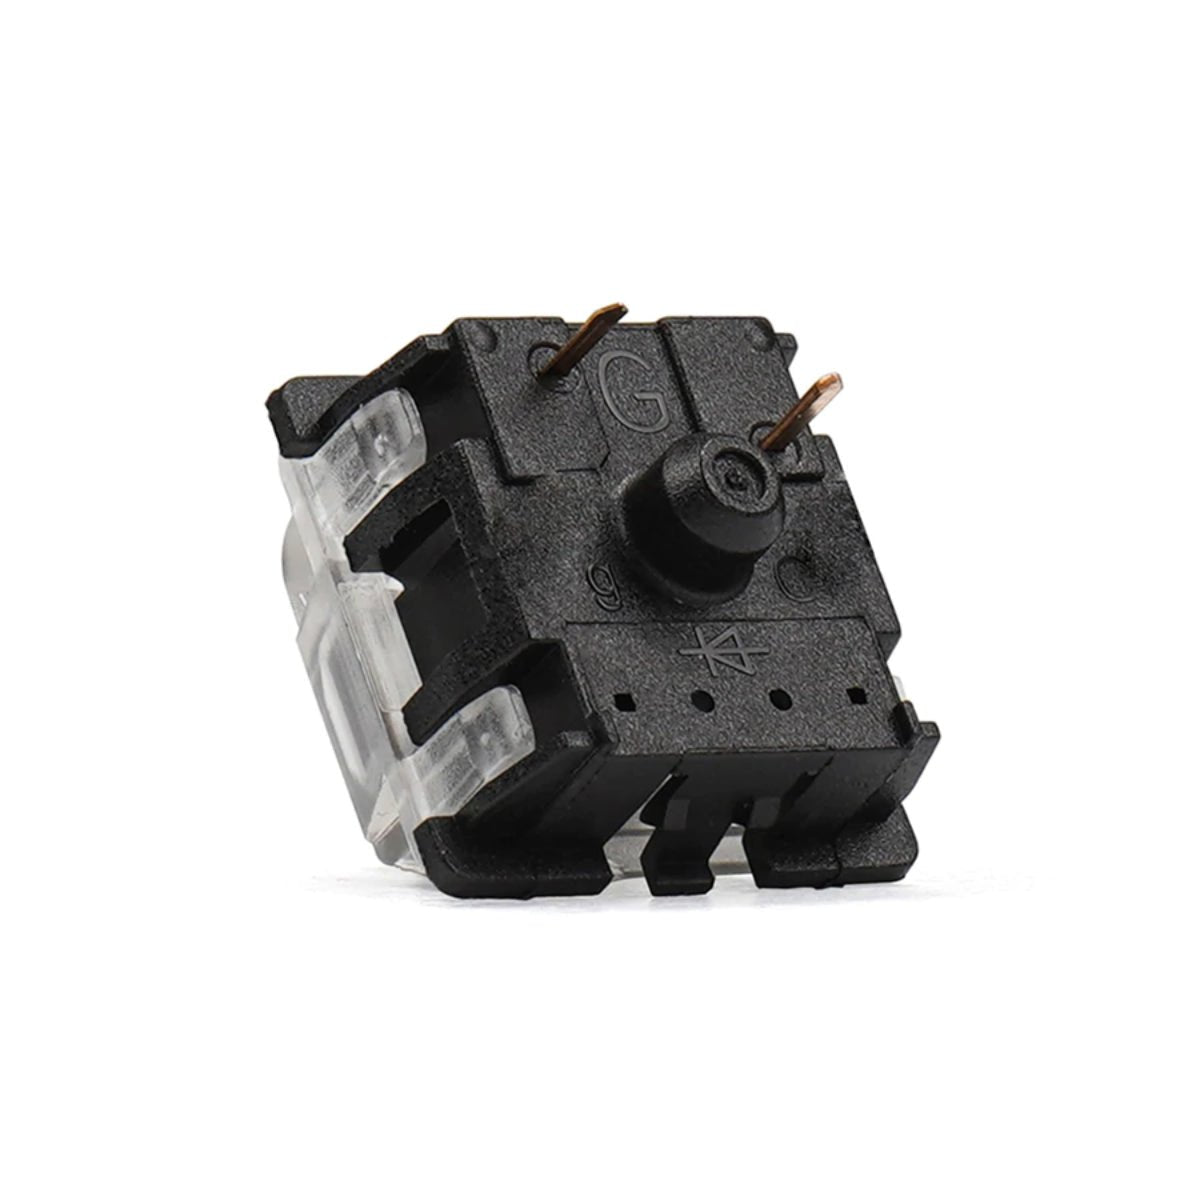 KBD Fans Gateron Tactile Switches 3 pin - Green - Store 974 | ستور ٩٧٤